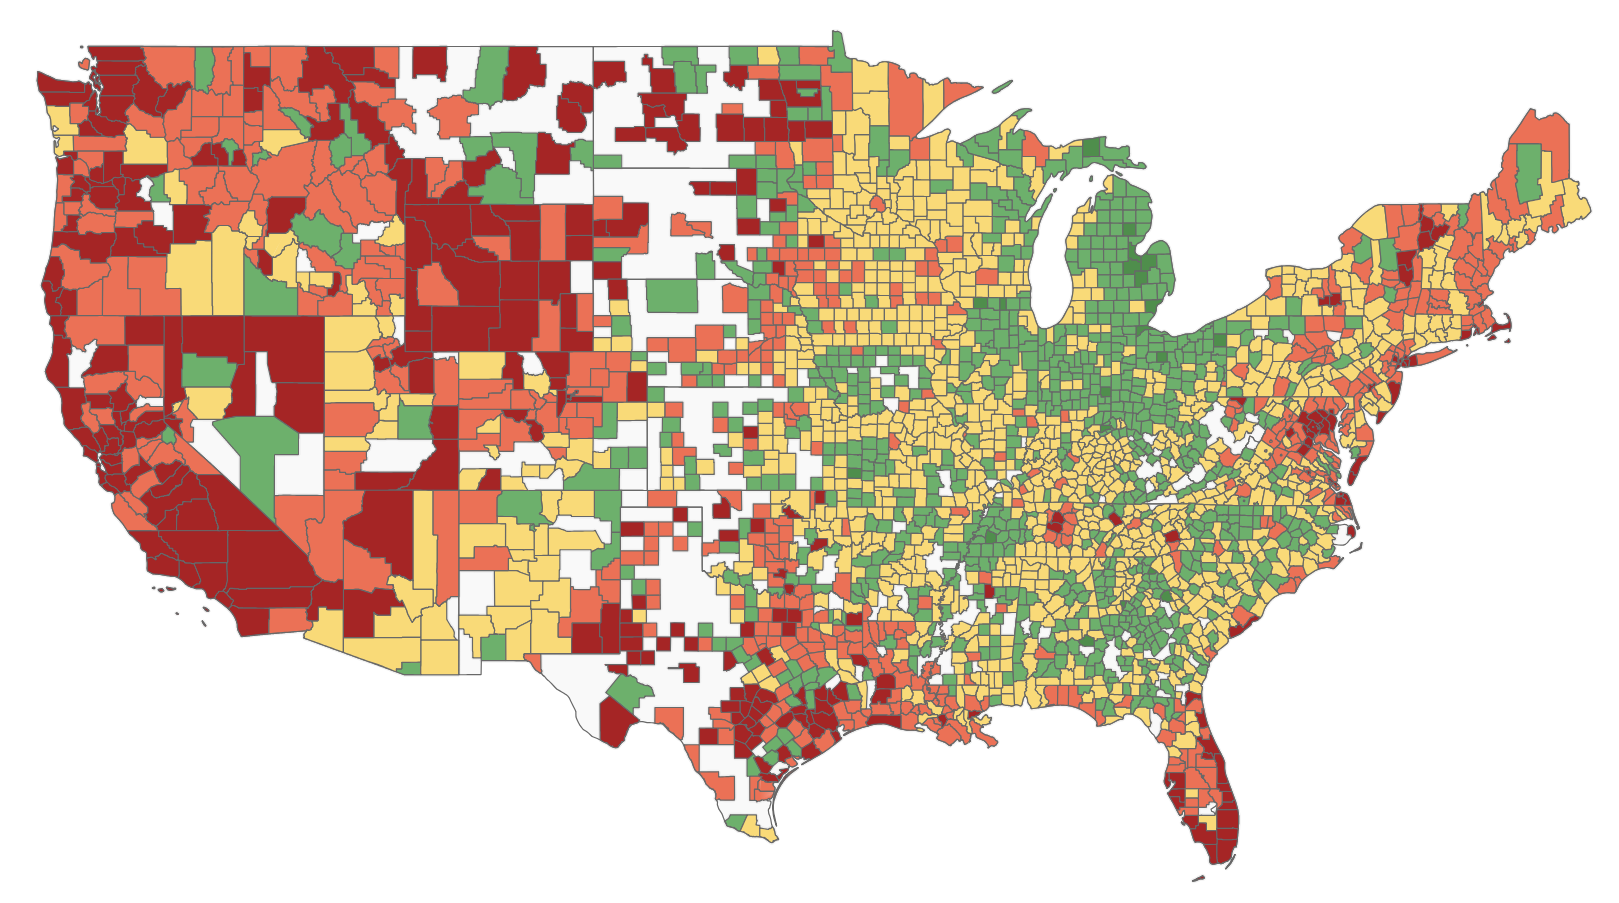 FHFA Map of USA by County